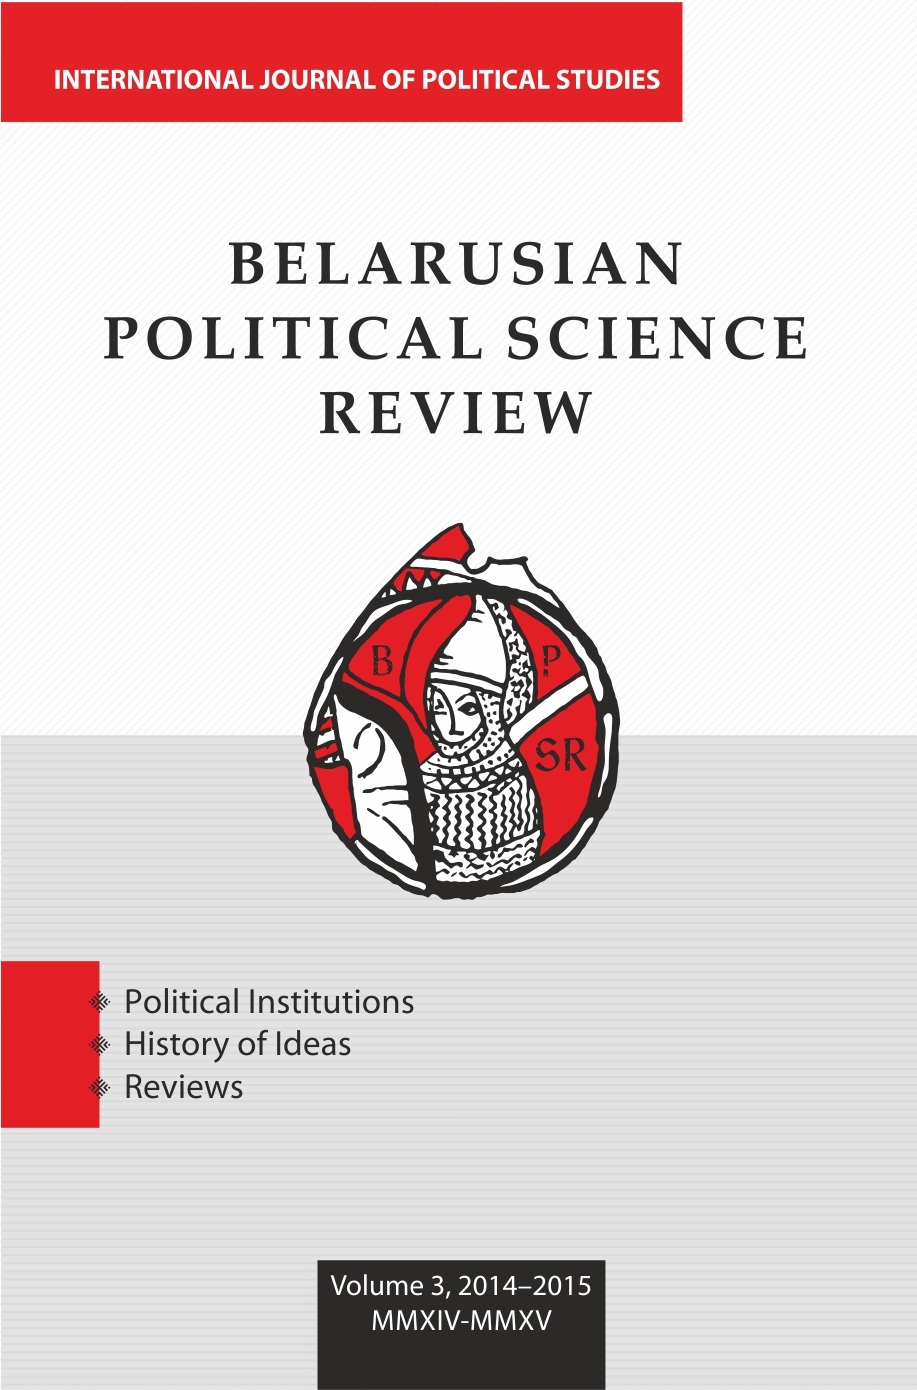 THE SYMBOLIC AND COMMUNICATIVE DIMENSIONS OF THE LINGUISTIC PRACTICES OF THE BELARUSIAN POLES Cover Image